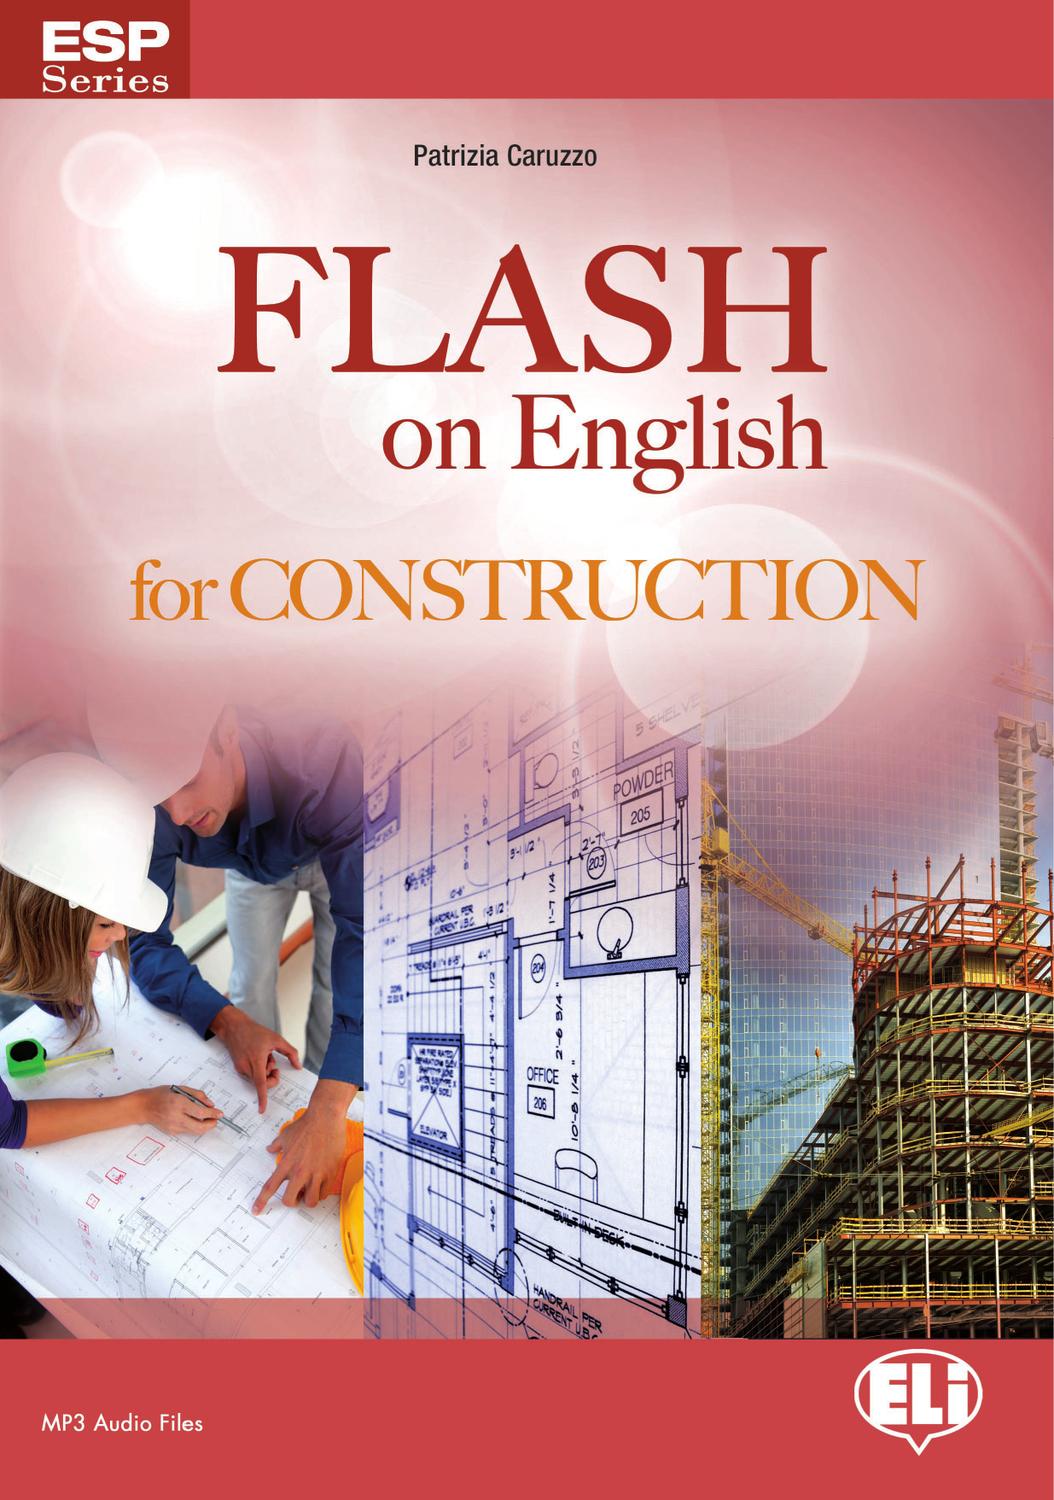 CONSTRUCTION (E.S.P. FLASH ON ENGLISH FOR) Book